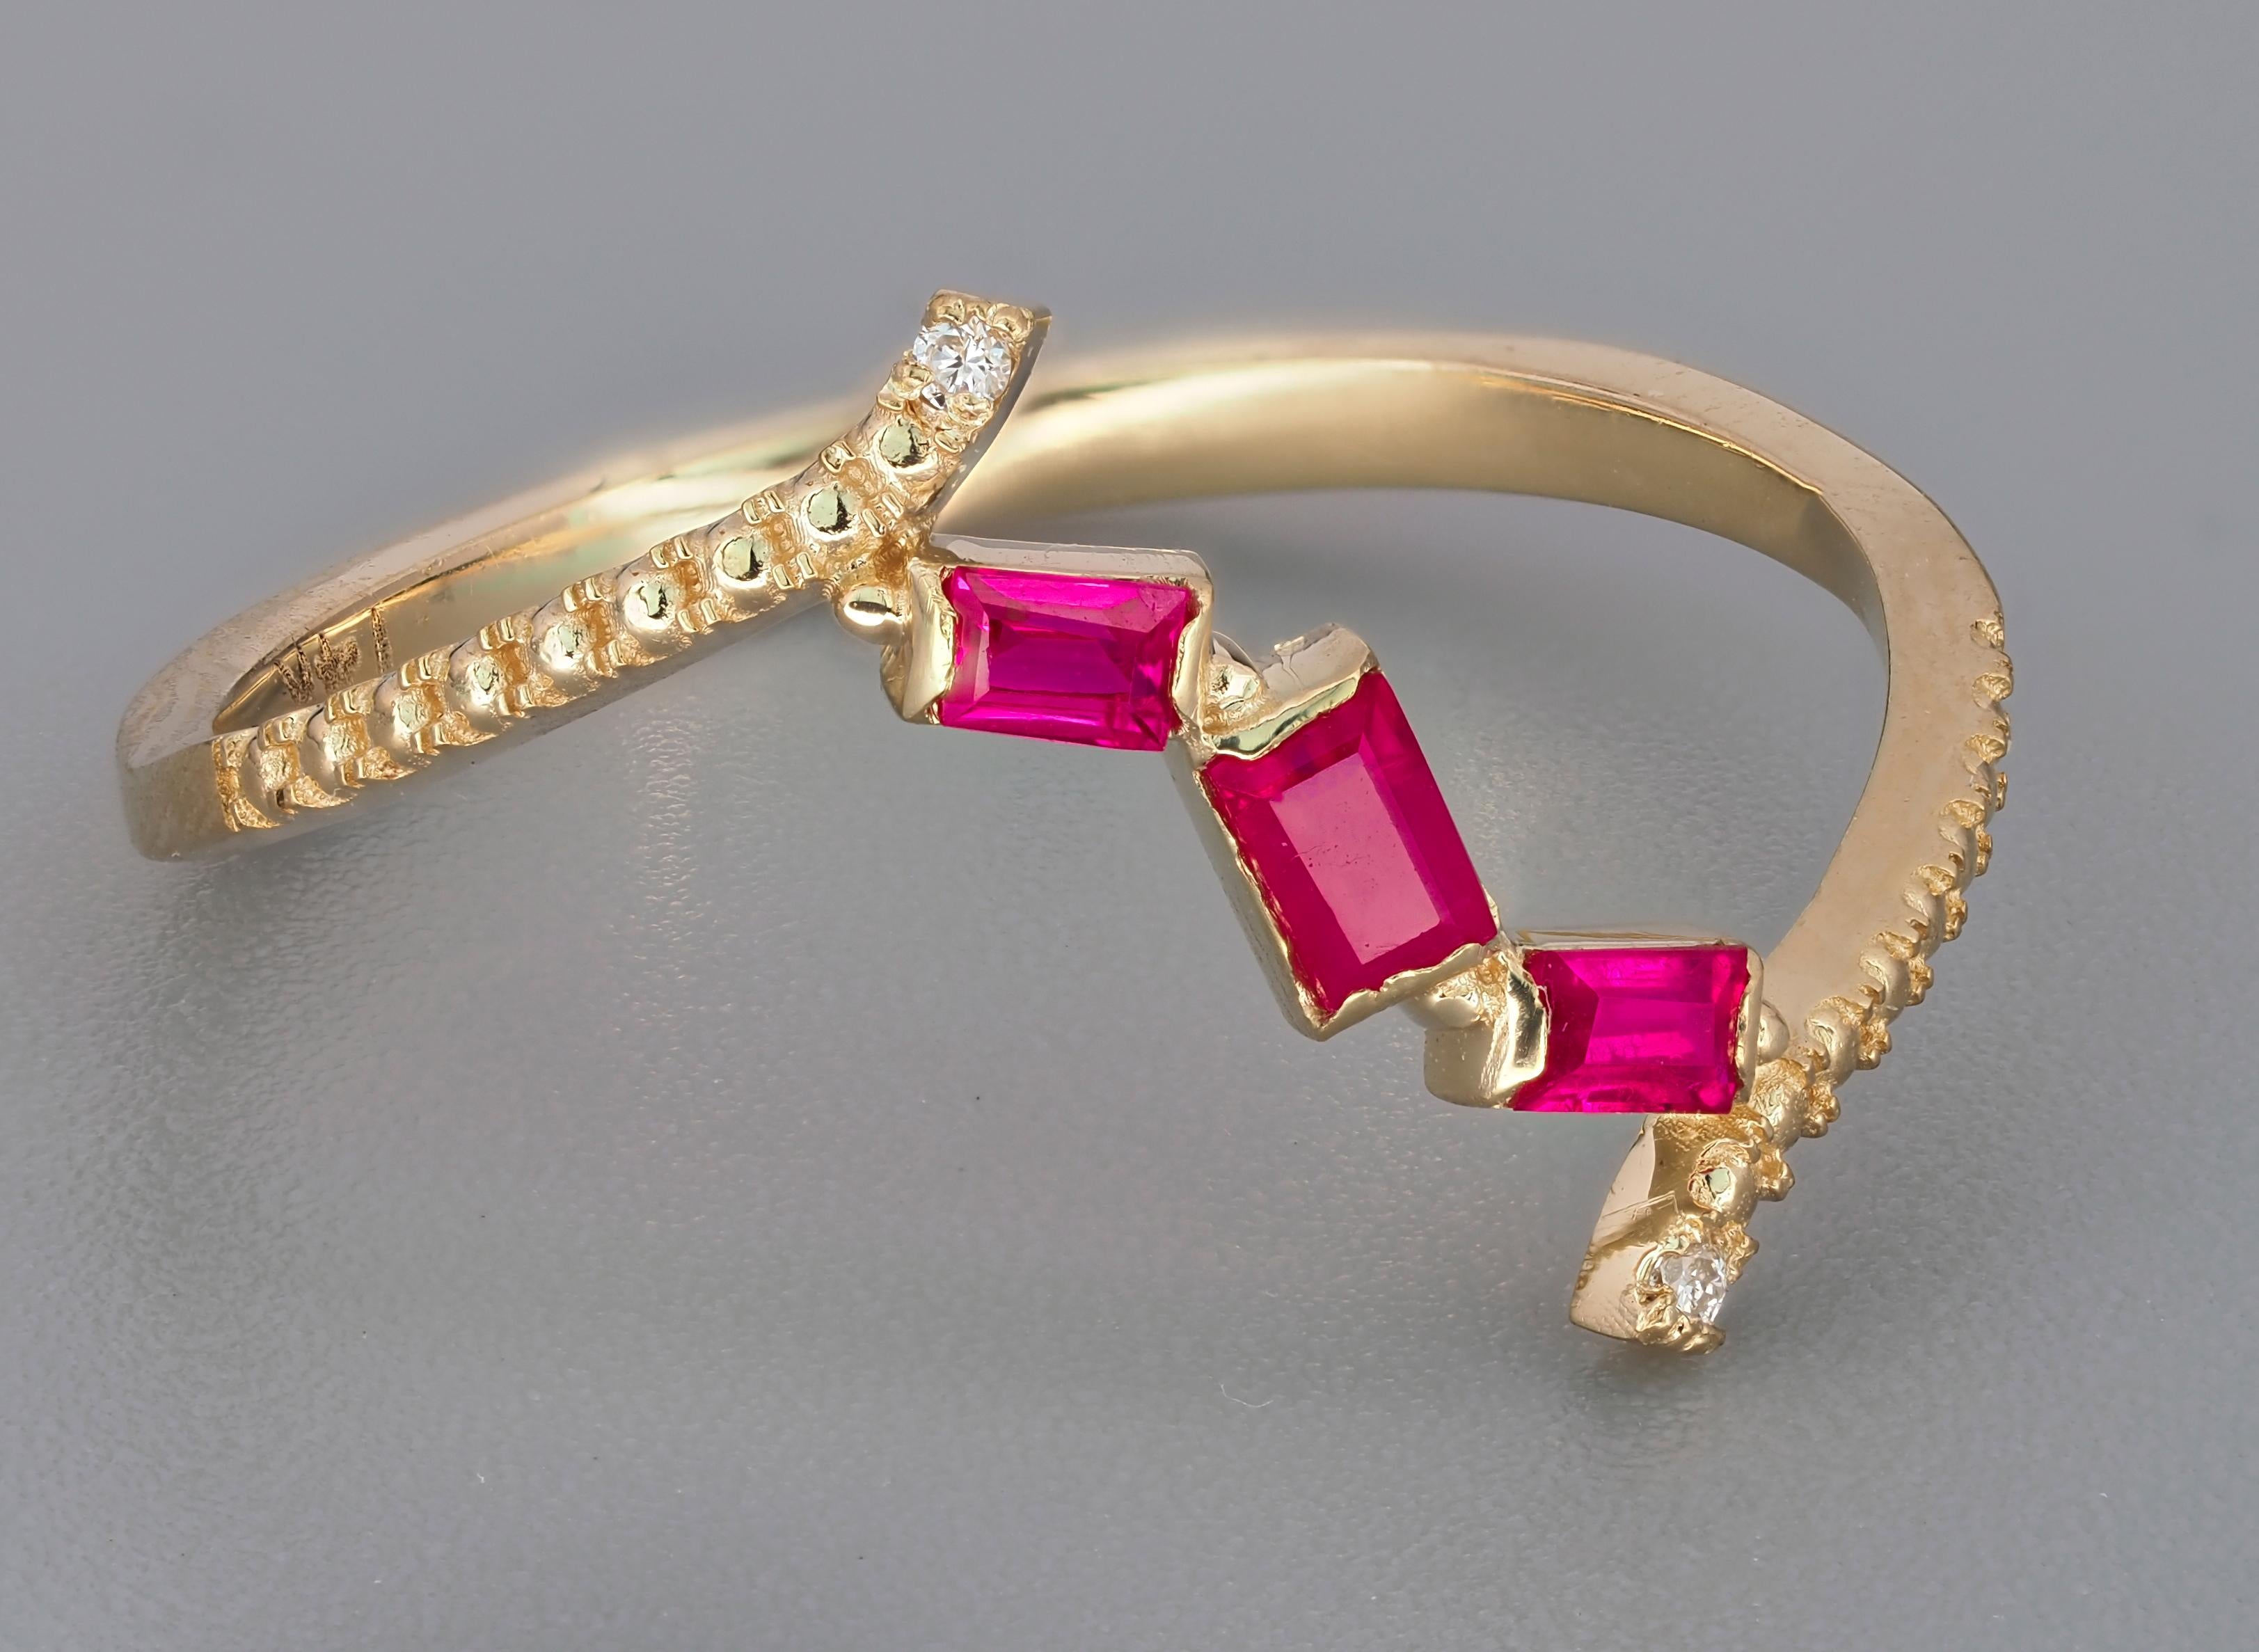 Baguette ruby ring. 
Genuine ruby 14k gold ring. 3 gemstone ruby ring. Minimalist ruby ring. July birthstone ring. Casual ruby ring.

Metal: 14k gold
Weight: 1.3 g. depends from size.

Central stone: Rubies - 3 pieces
Cut: Baguette
Weight: aprx 0.6